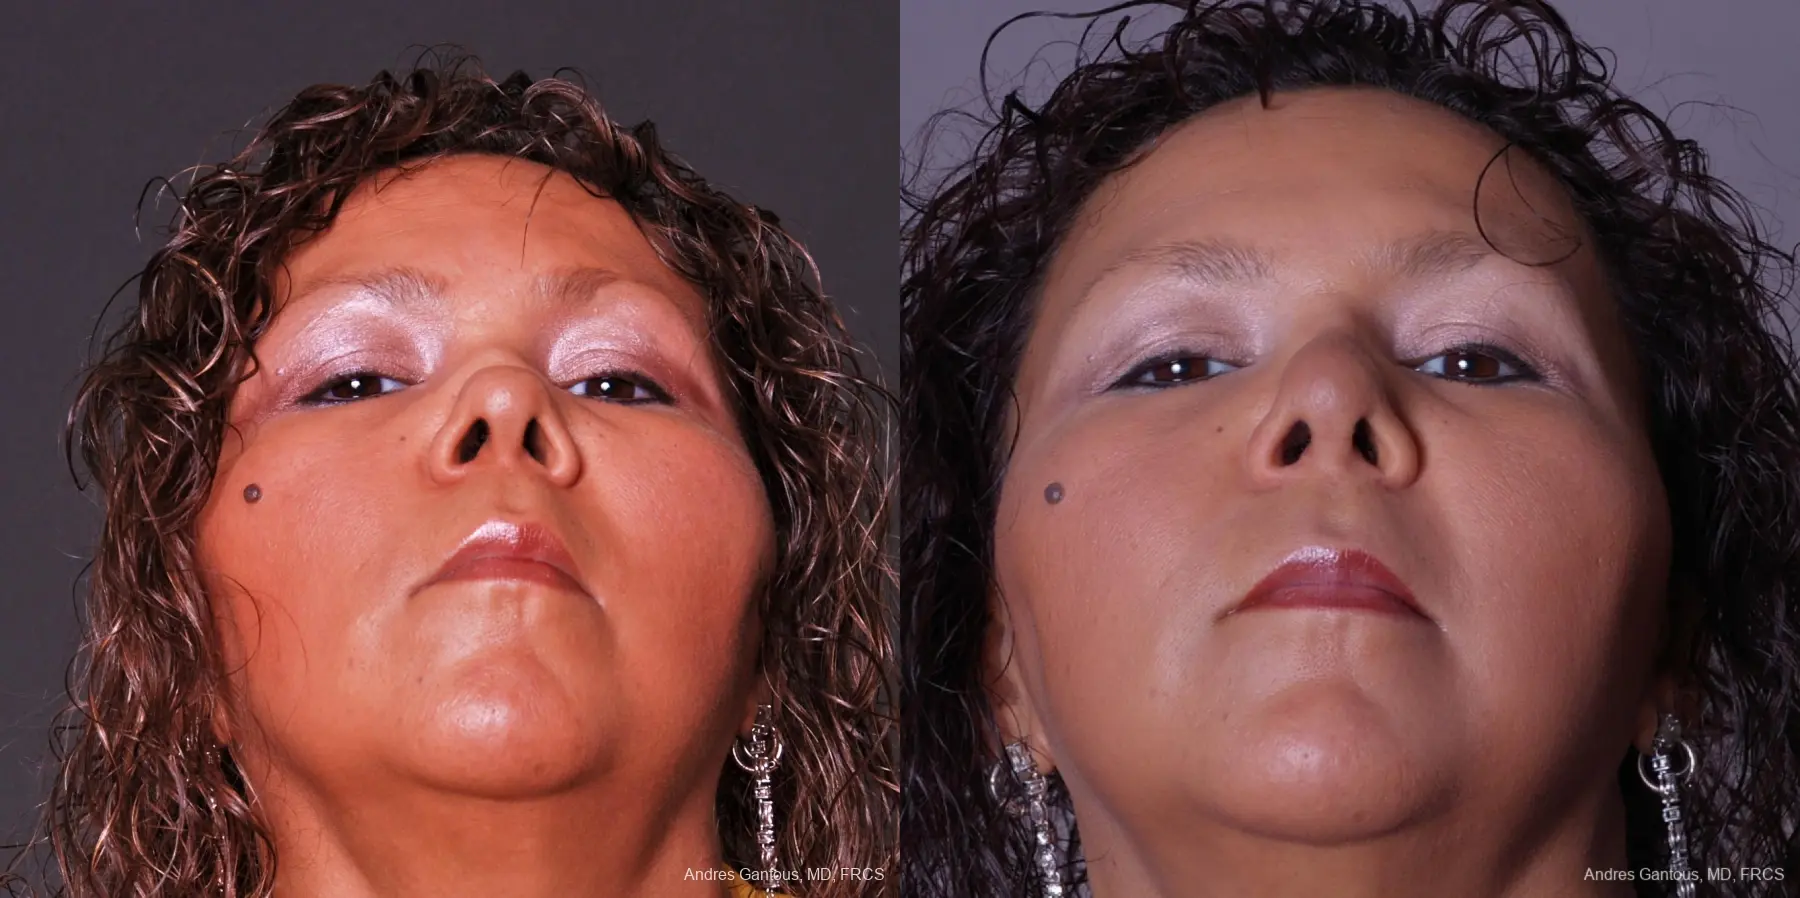 Reconstructive Rhinoplasty: Patient 1 - Before and After 4